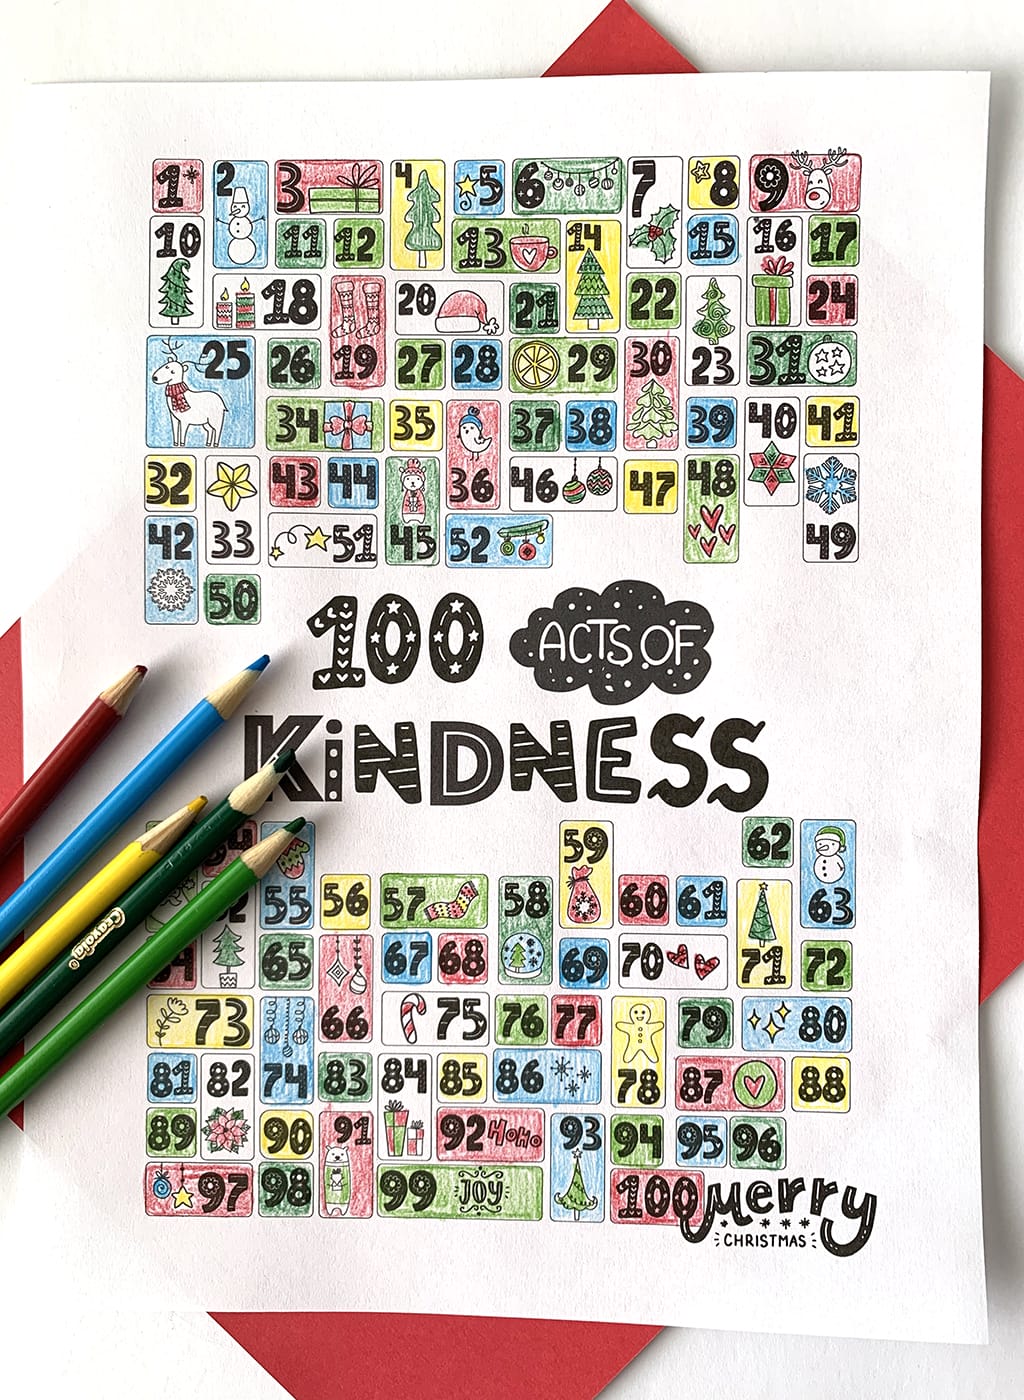 100 Acts of Kindness Coloring Countdown